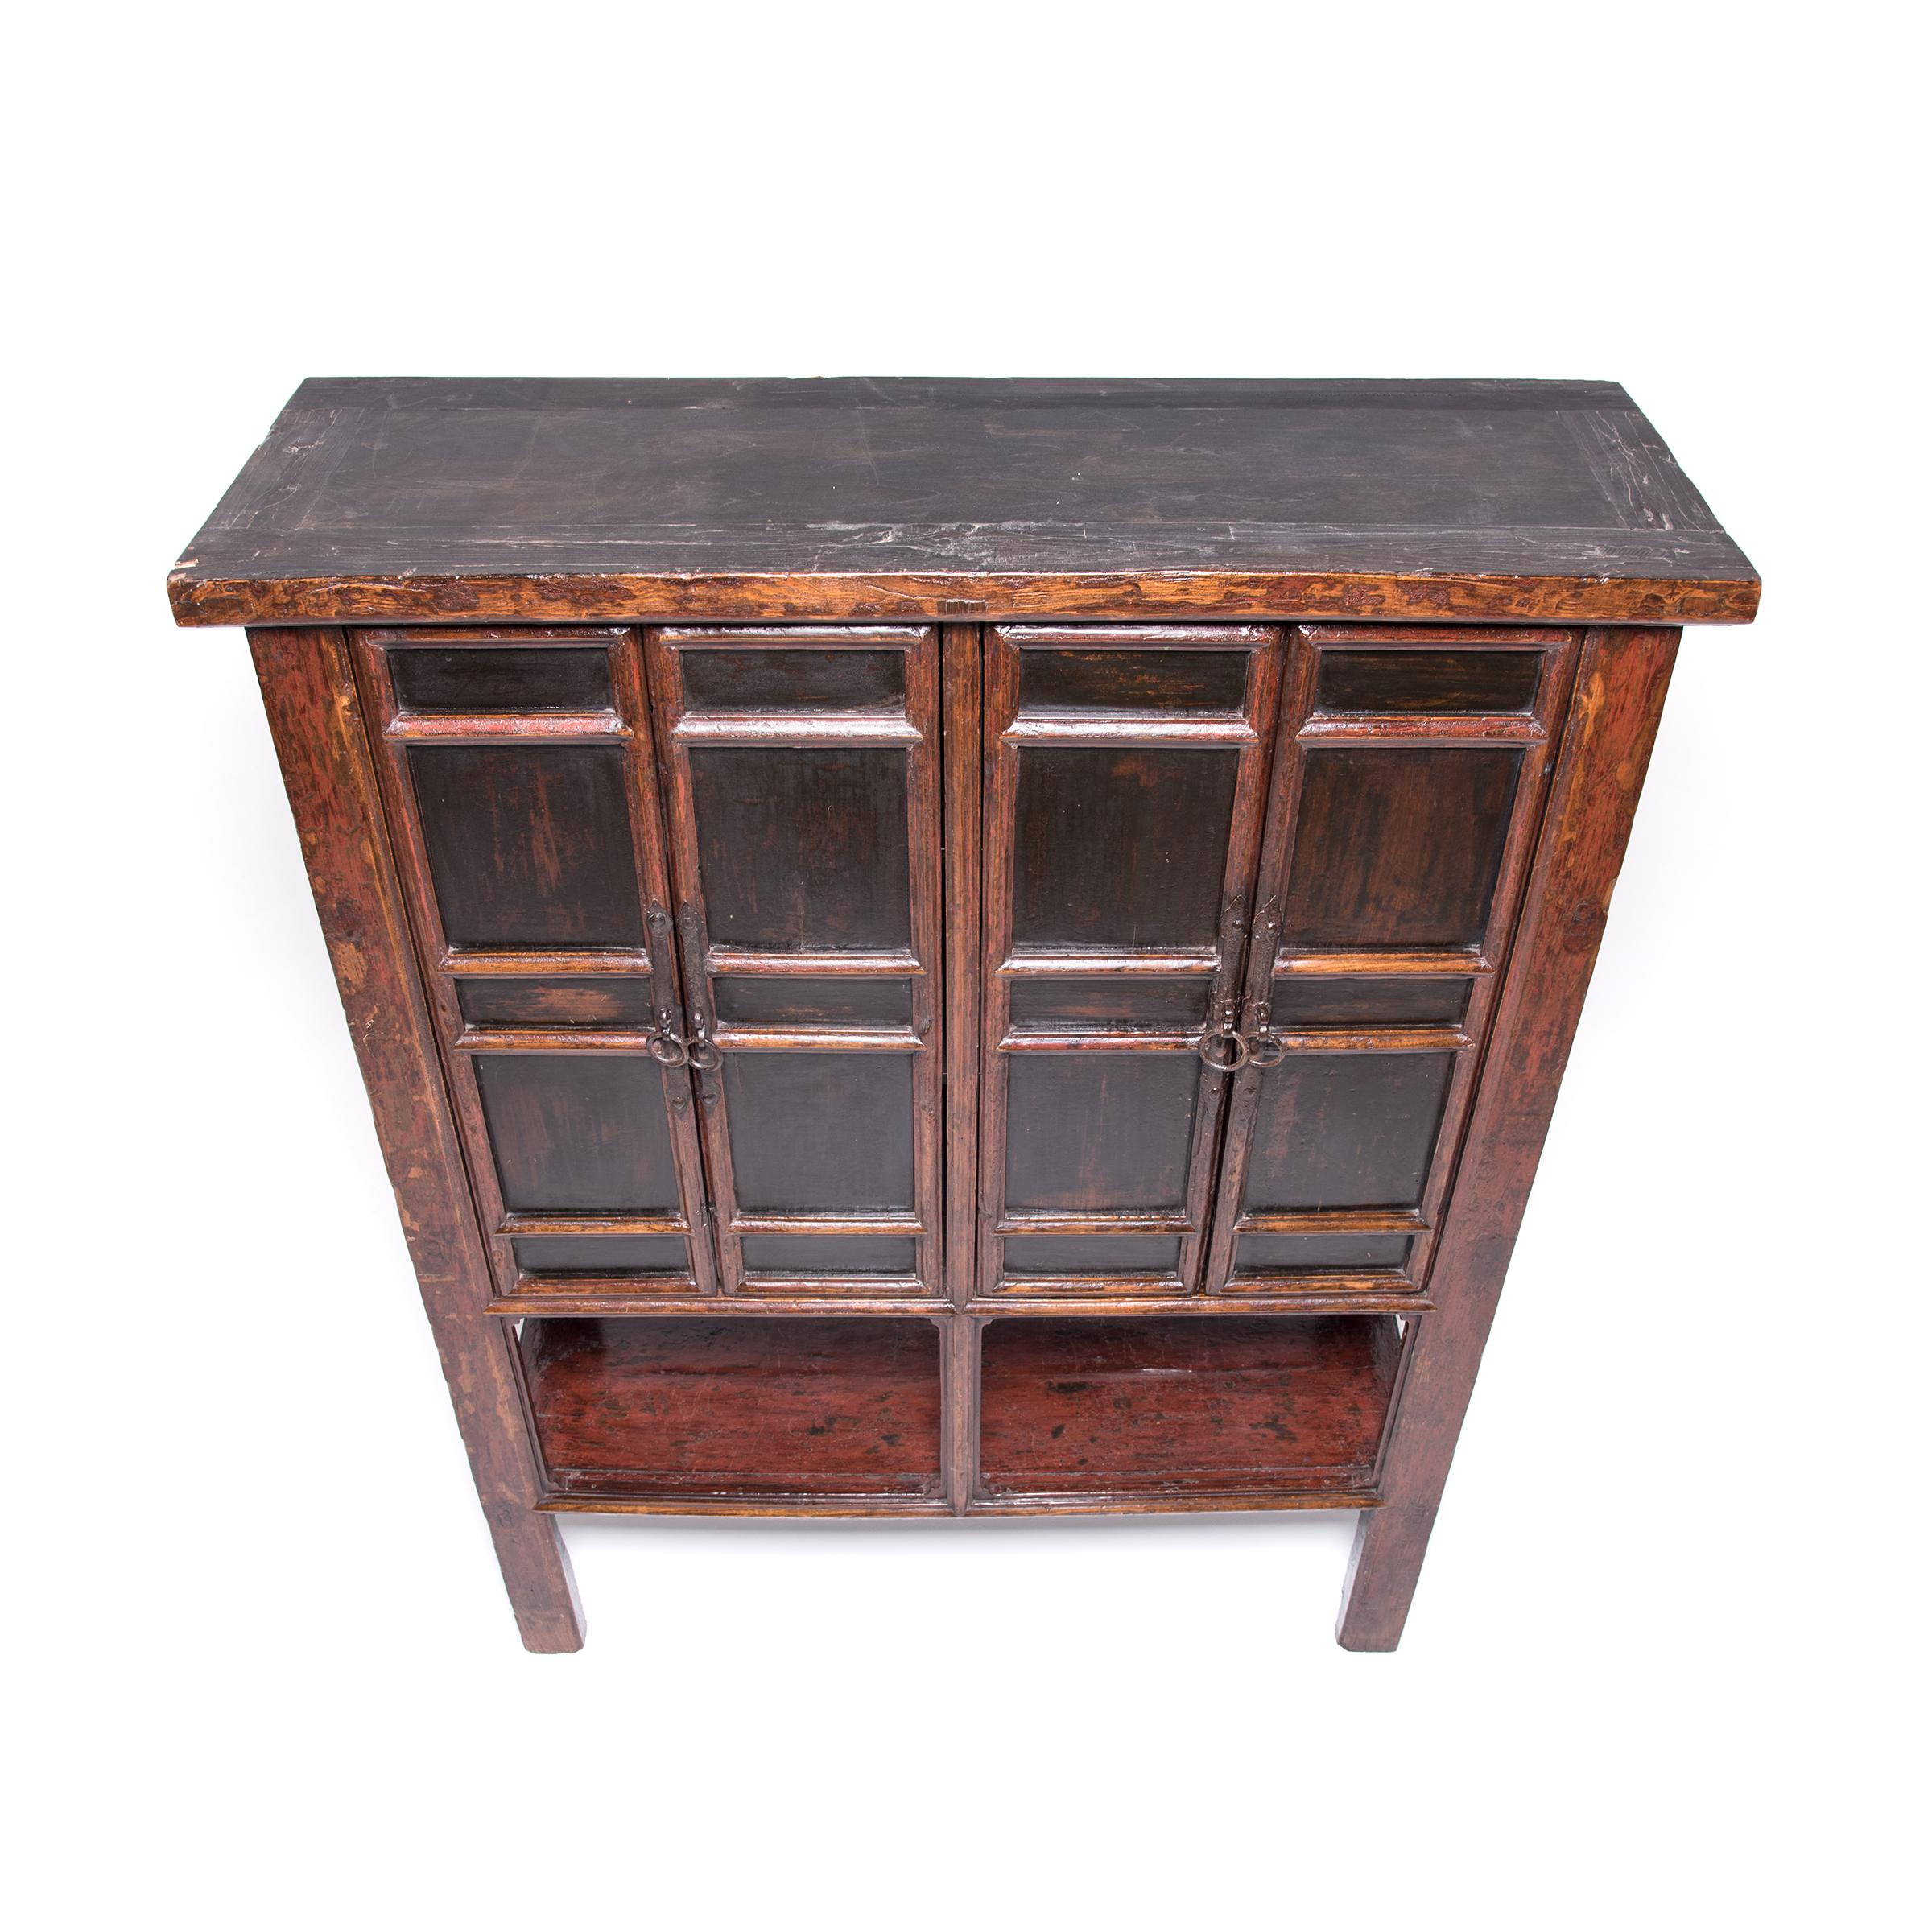 19th Century Provincial Chinese Cabinet with Open Shelf, c. 1850